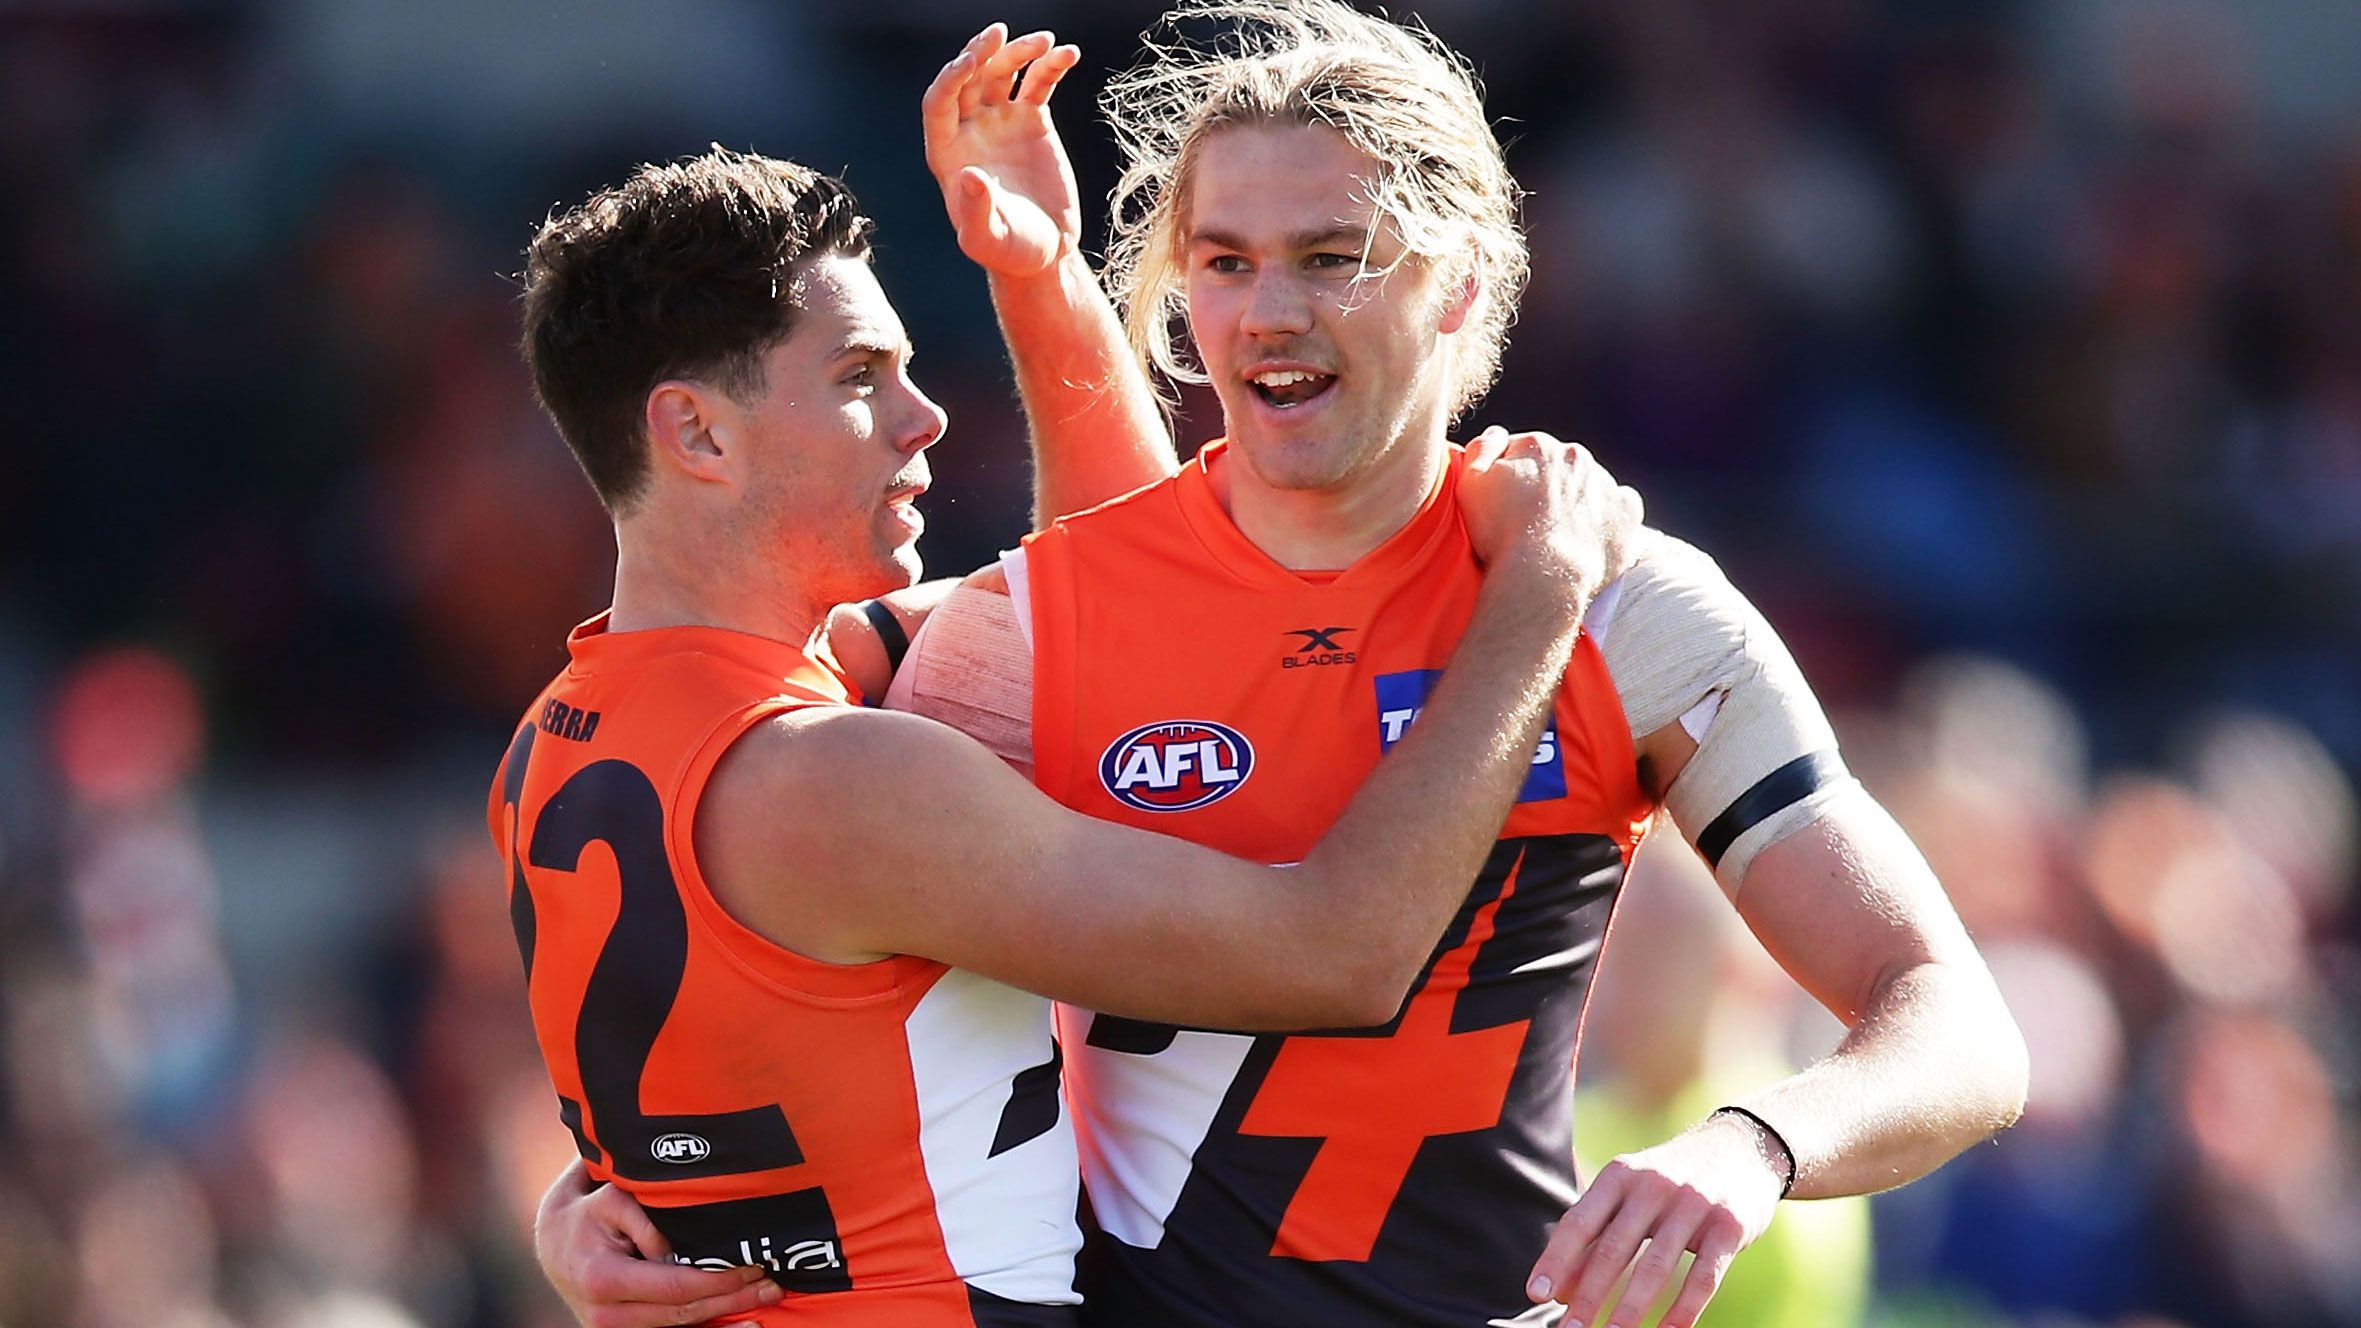 GWS Giants land major signing coup with Harry Himmelberg inking $4.8m extension